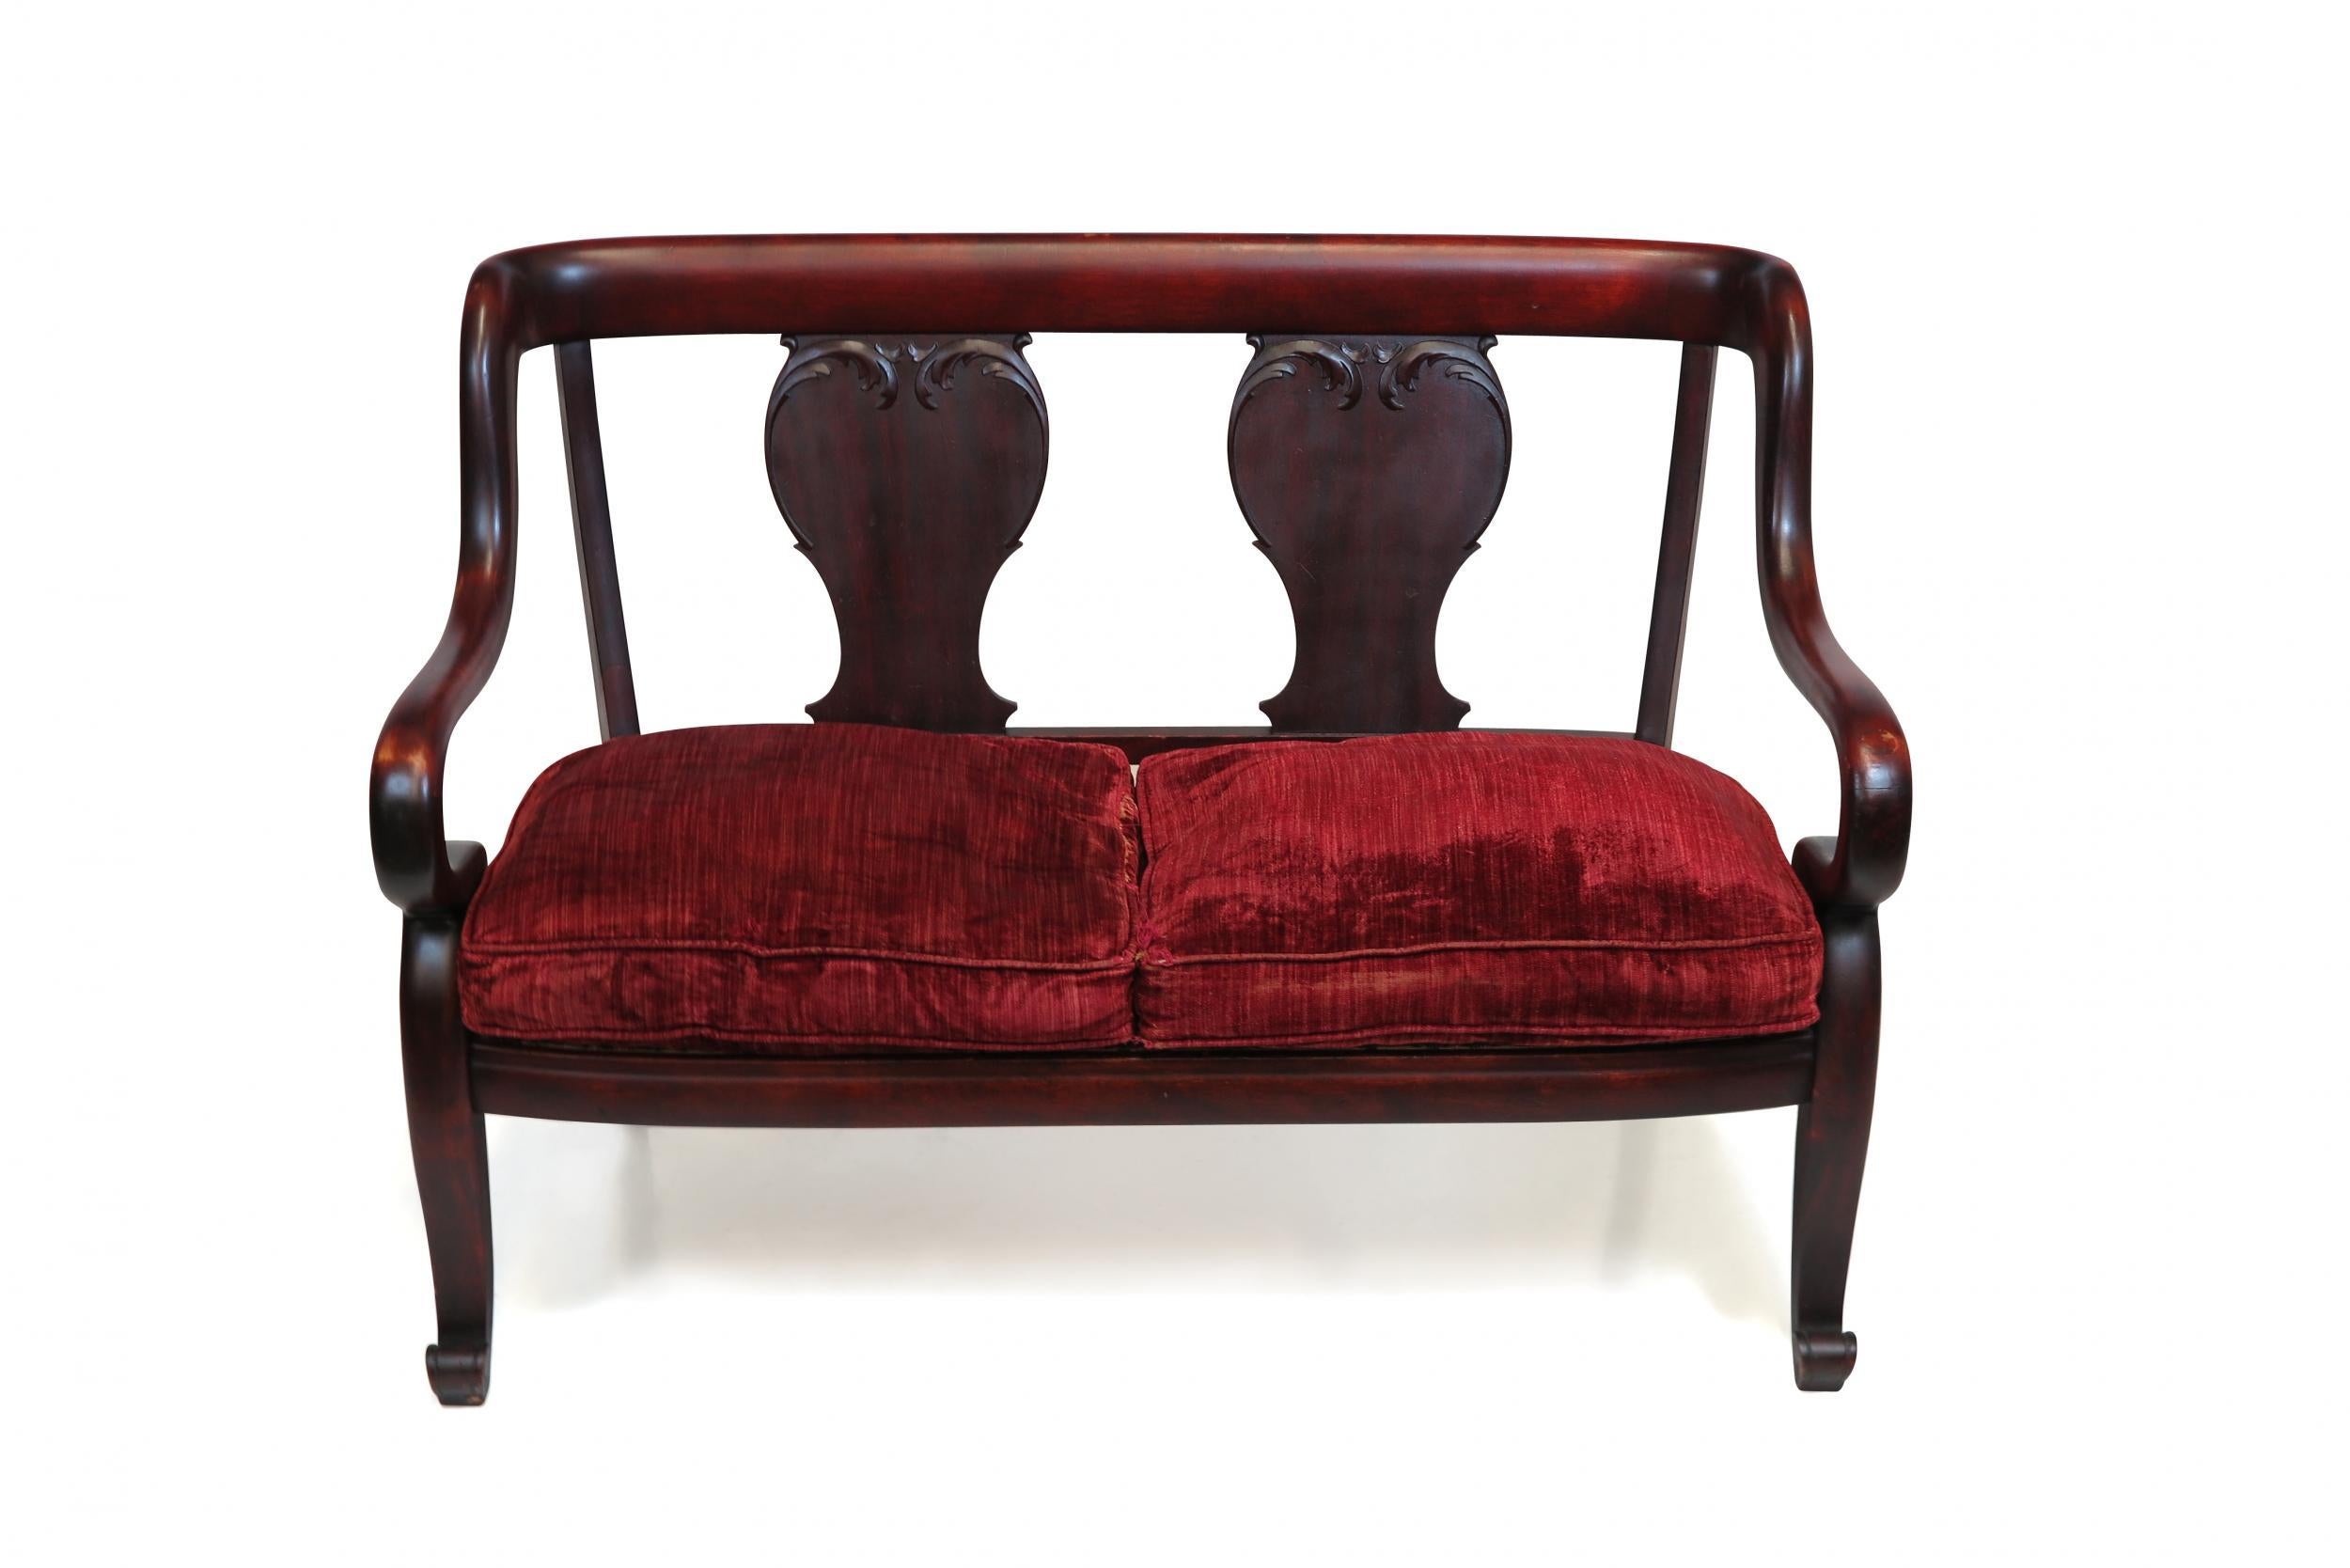 Victorian settee crafted of solid mahogany, with curved arms. Upholstery recommended.